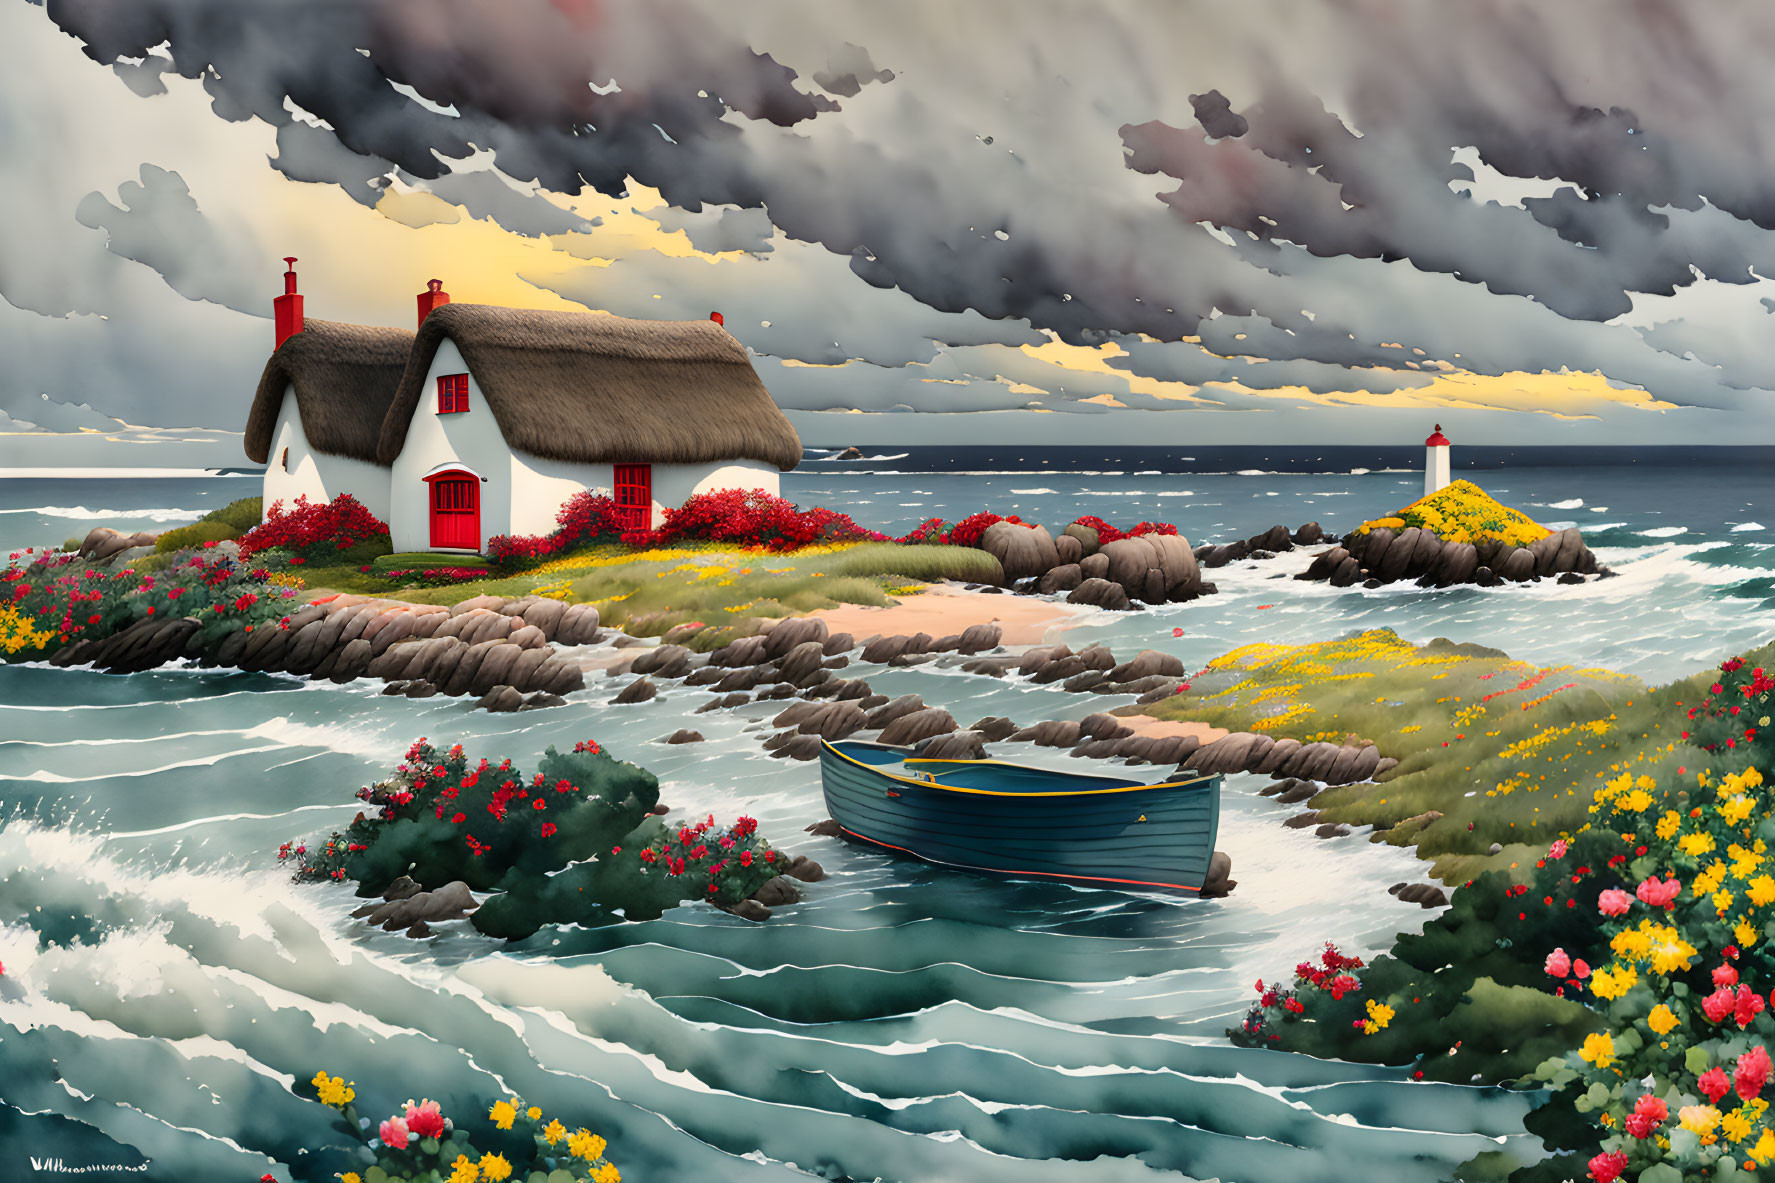 Tranquil coastal landscape with cottage, boat, flowers, and lighthouse